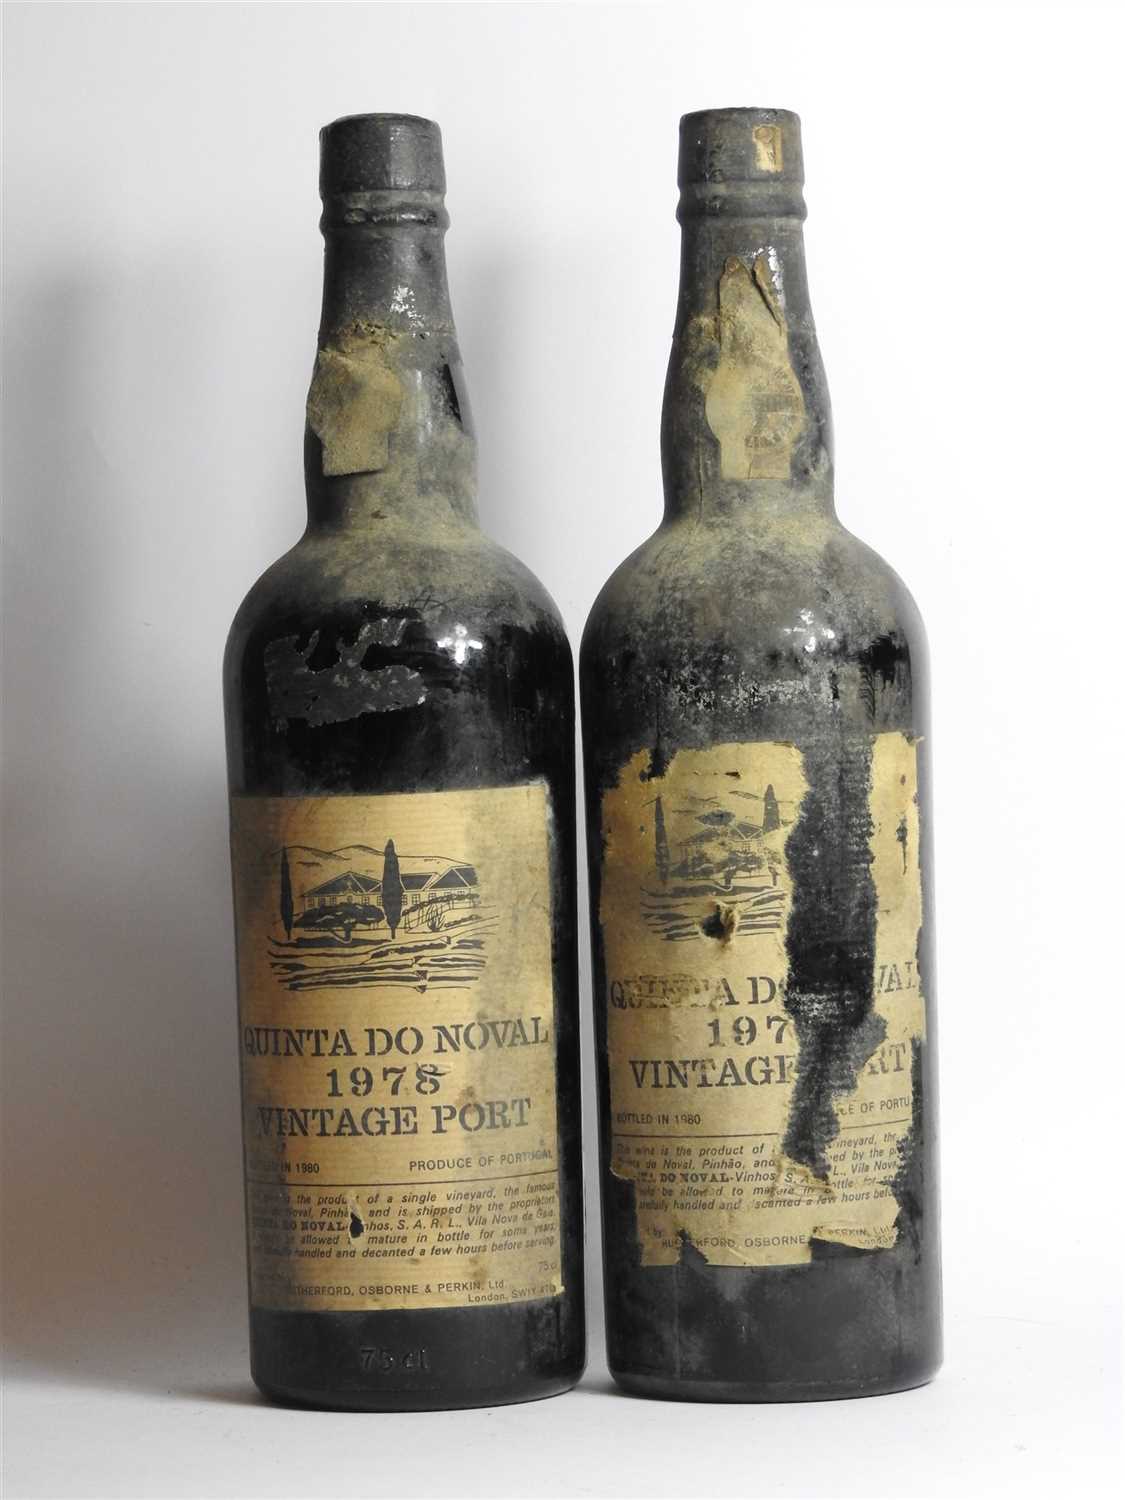 Lot 62 - Quinta do Noval, 1978, one bottle and 197?, one bottle (very damaged label), two bottles in total